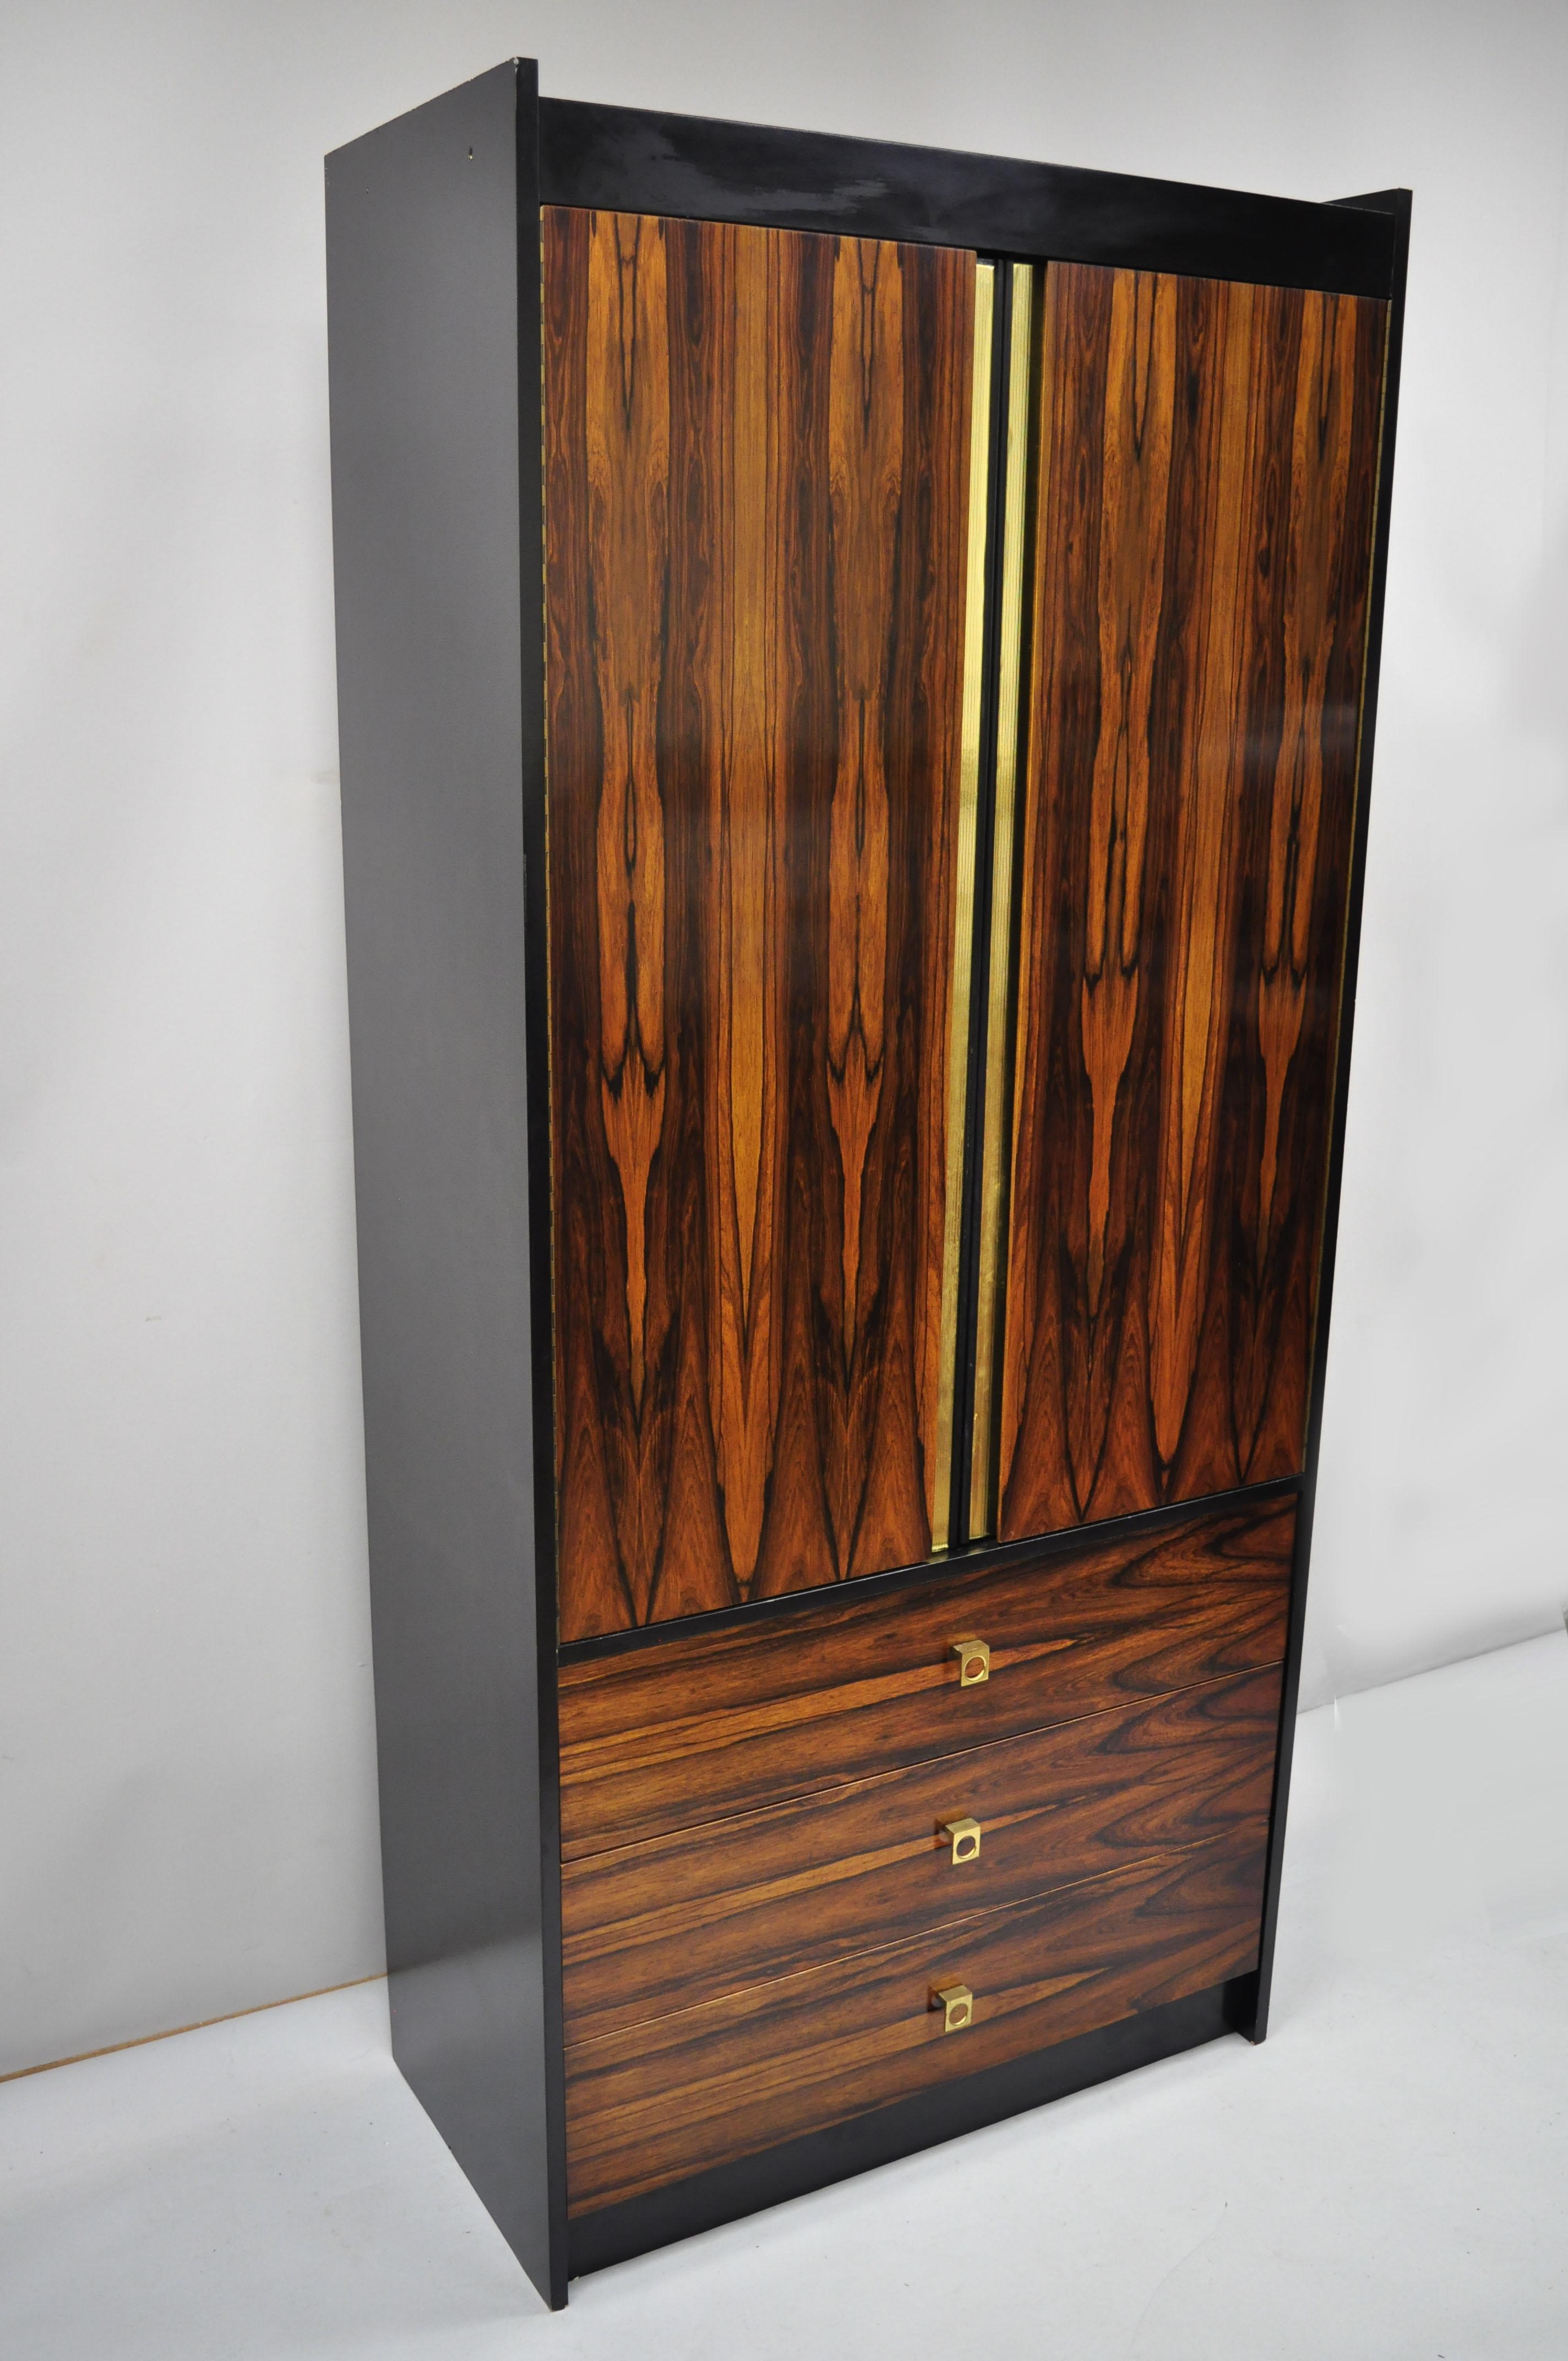 Vintage Mid-Century Modern rosewood and black laminate John Stuart style wardrobe cabinet armoire (B). Item features a tall impressive form, stunning wood grain, 2 adjustable shelves, 1 fixed shelf, gold foil taped trim, 2 swing doors, 3 drawers,